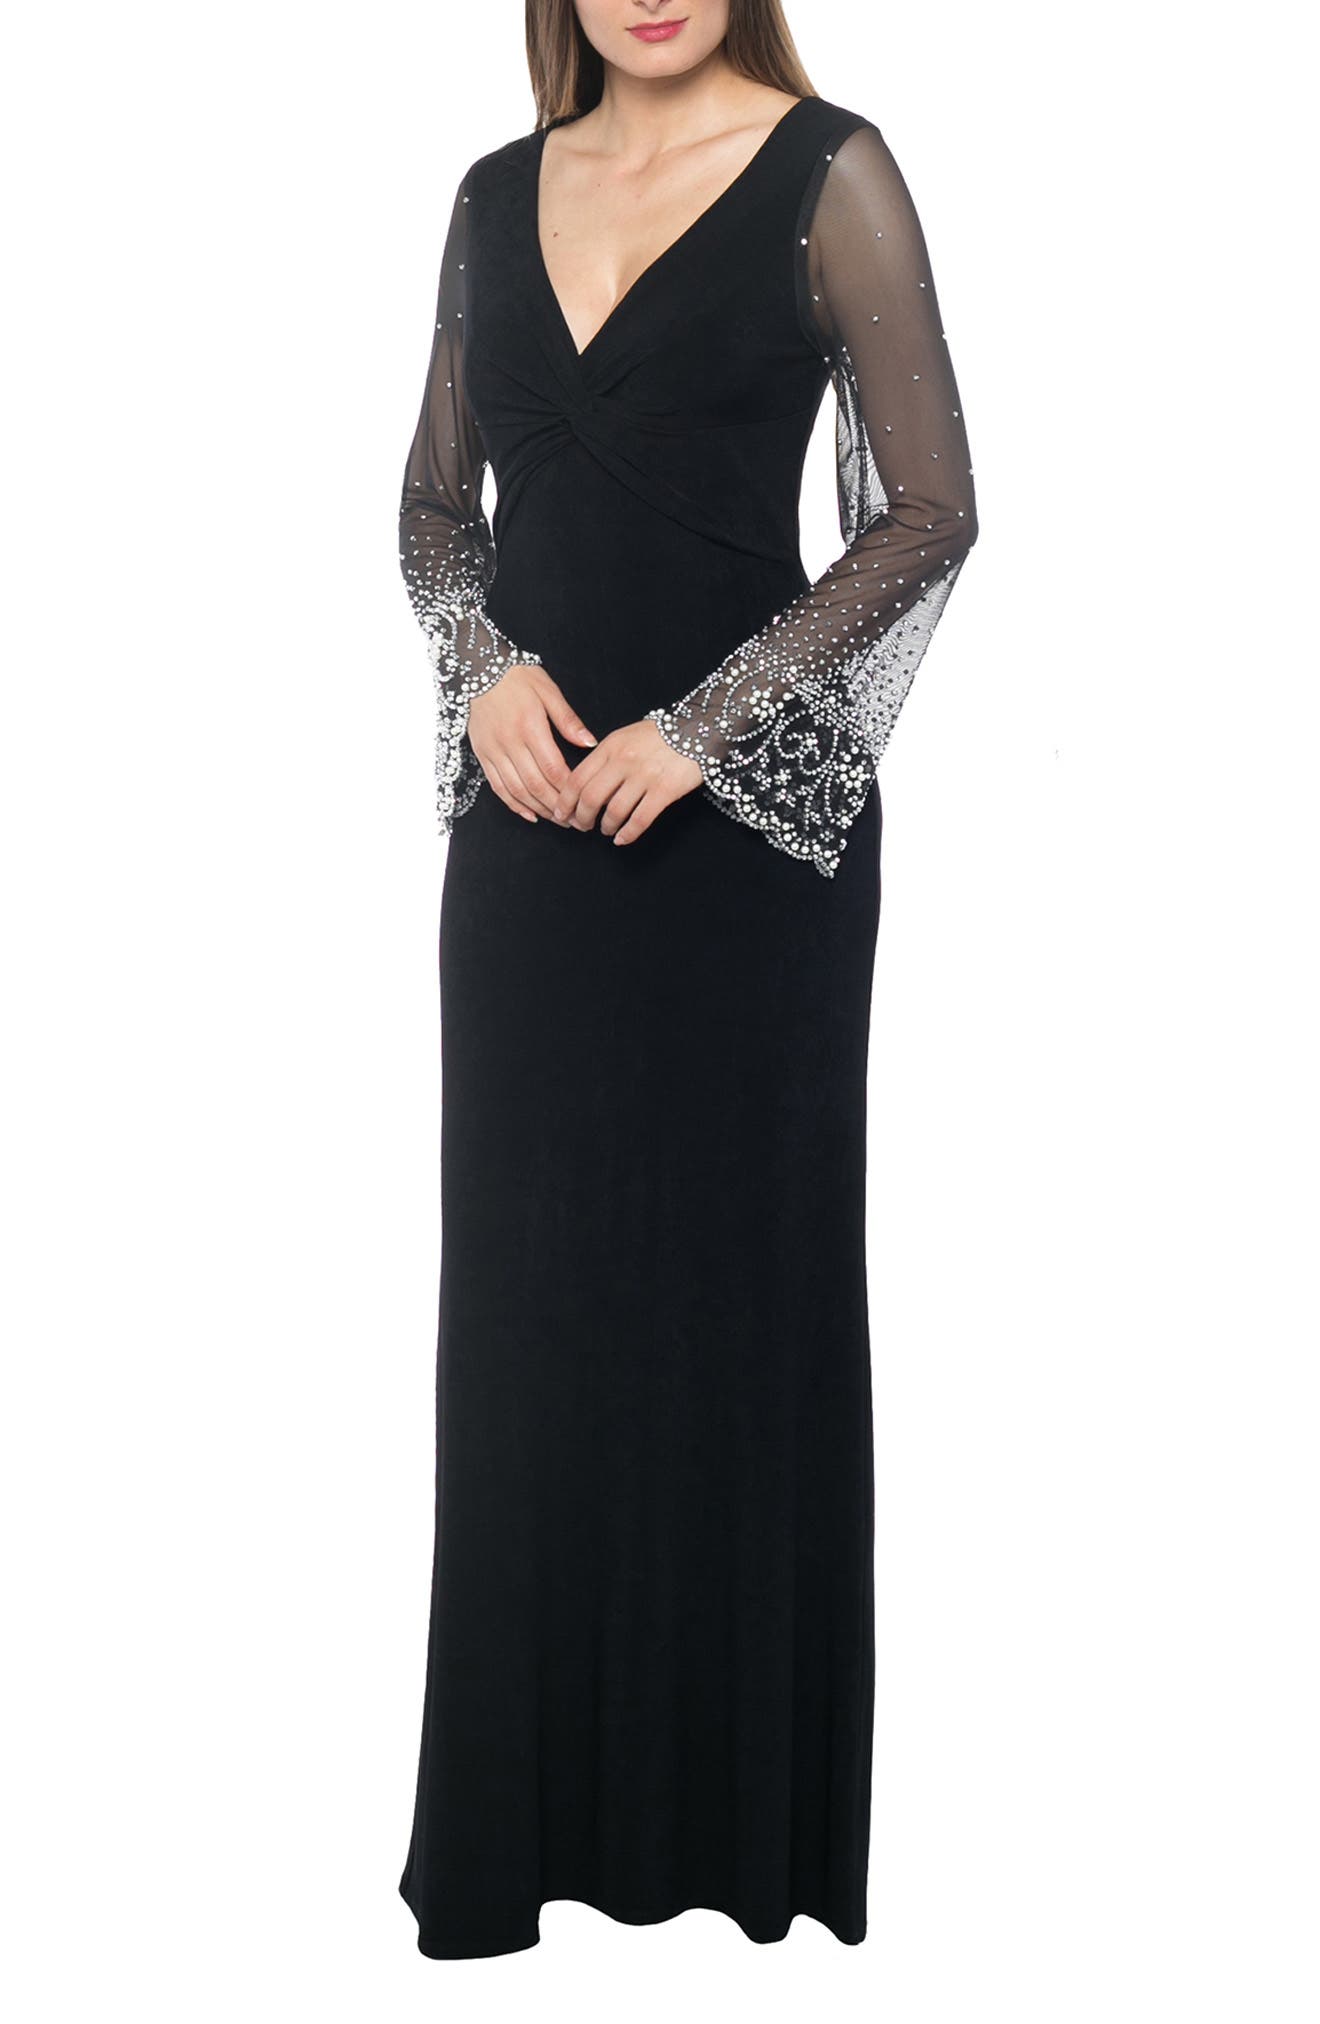 1920s Fashion & Clothing | Roaring 20s Attire Marina Beaded Sheer Sleeve Gown in Black at Nordstrom Rack Size 14 $96.97 AT vintagedancer.com